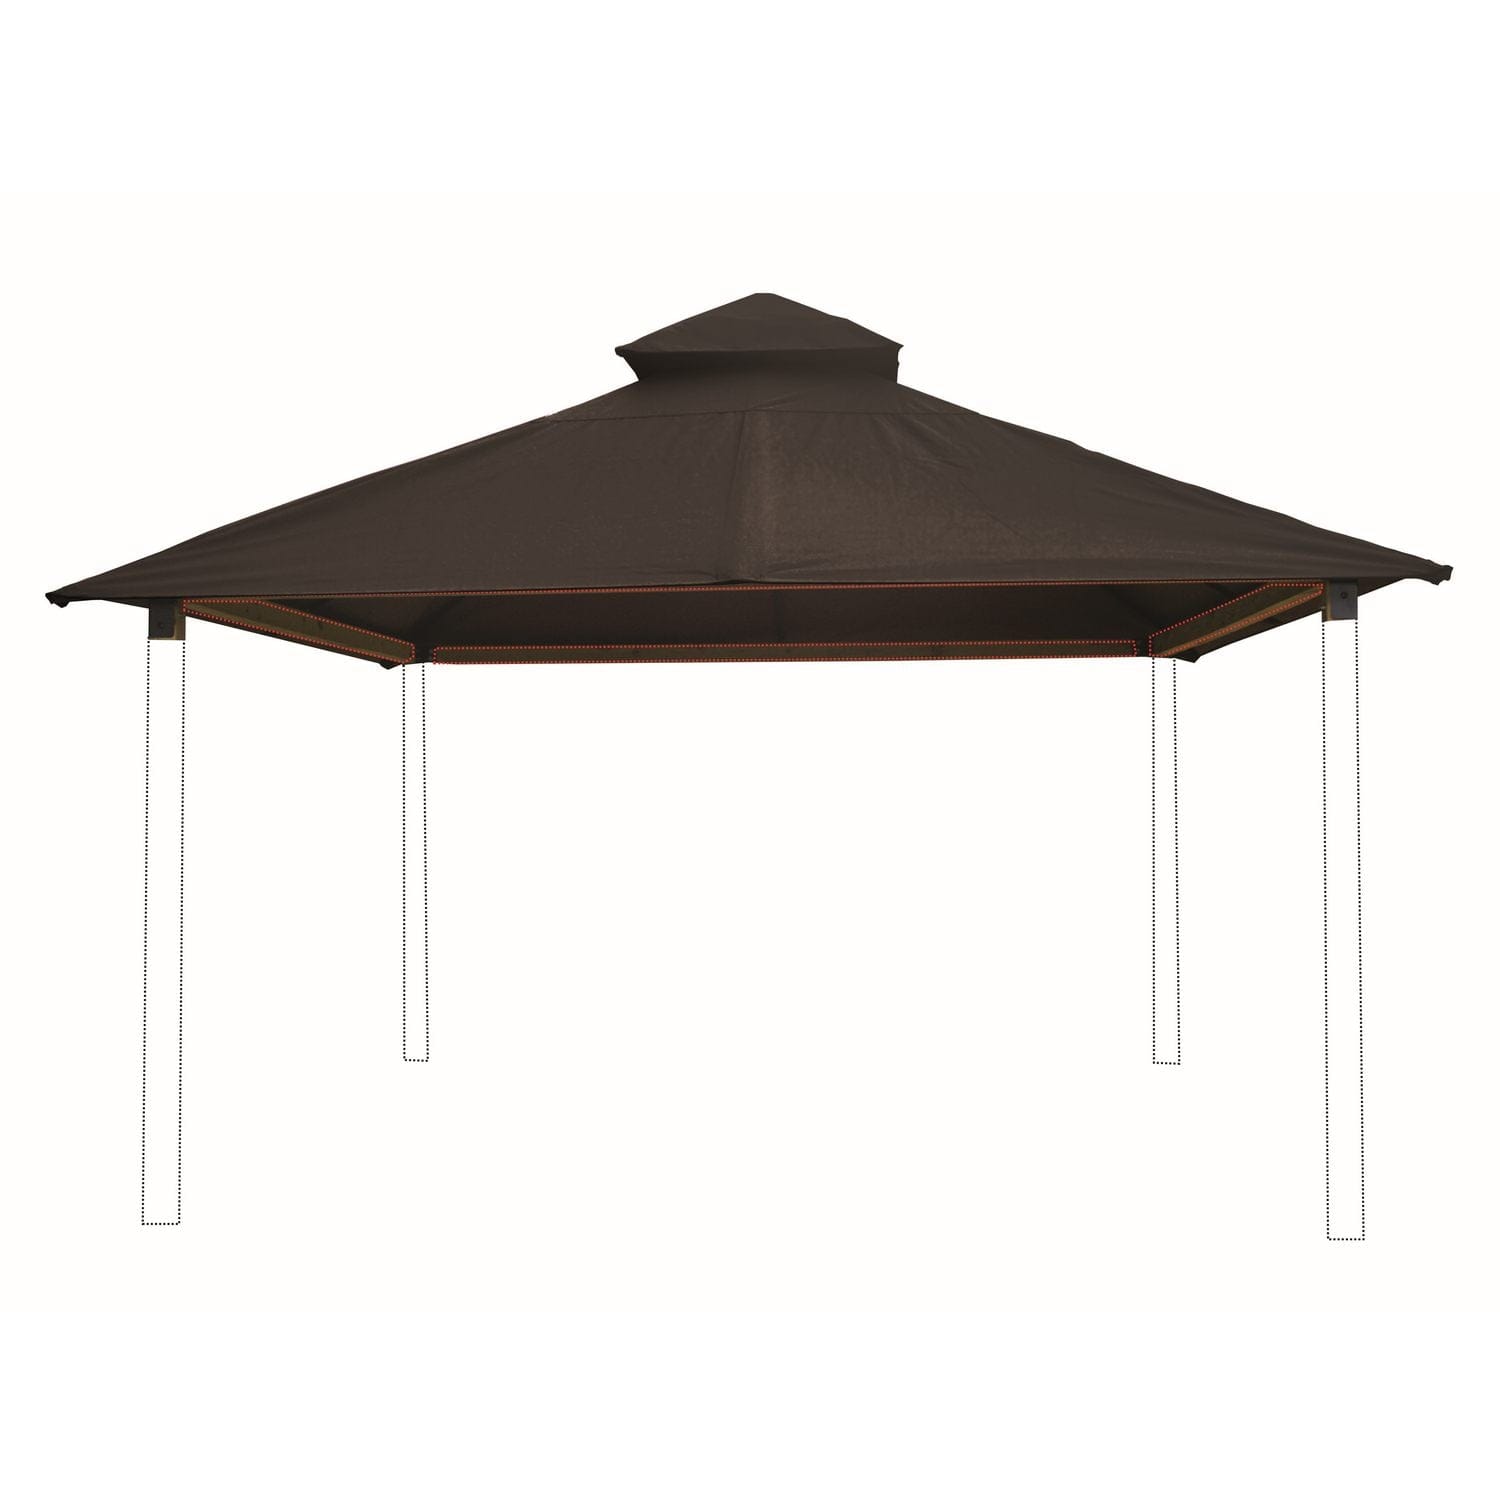 Riverstone Industries Soft Top Gazebos 12FT X 12FT Riverstone | ACACIA Gazebo Roof Framing and Mounting Kit With OutDURA Canopy - Storm Grey AGOK12-STORM-GREY